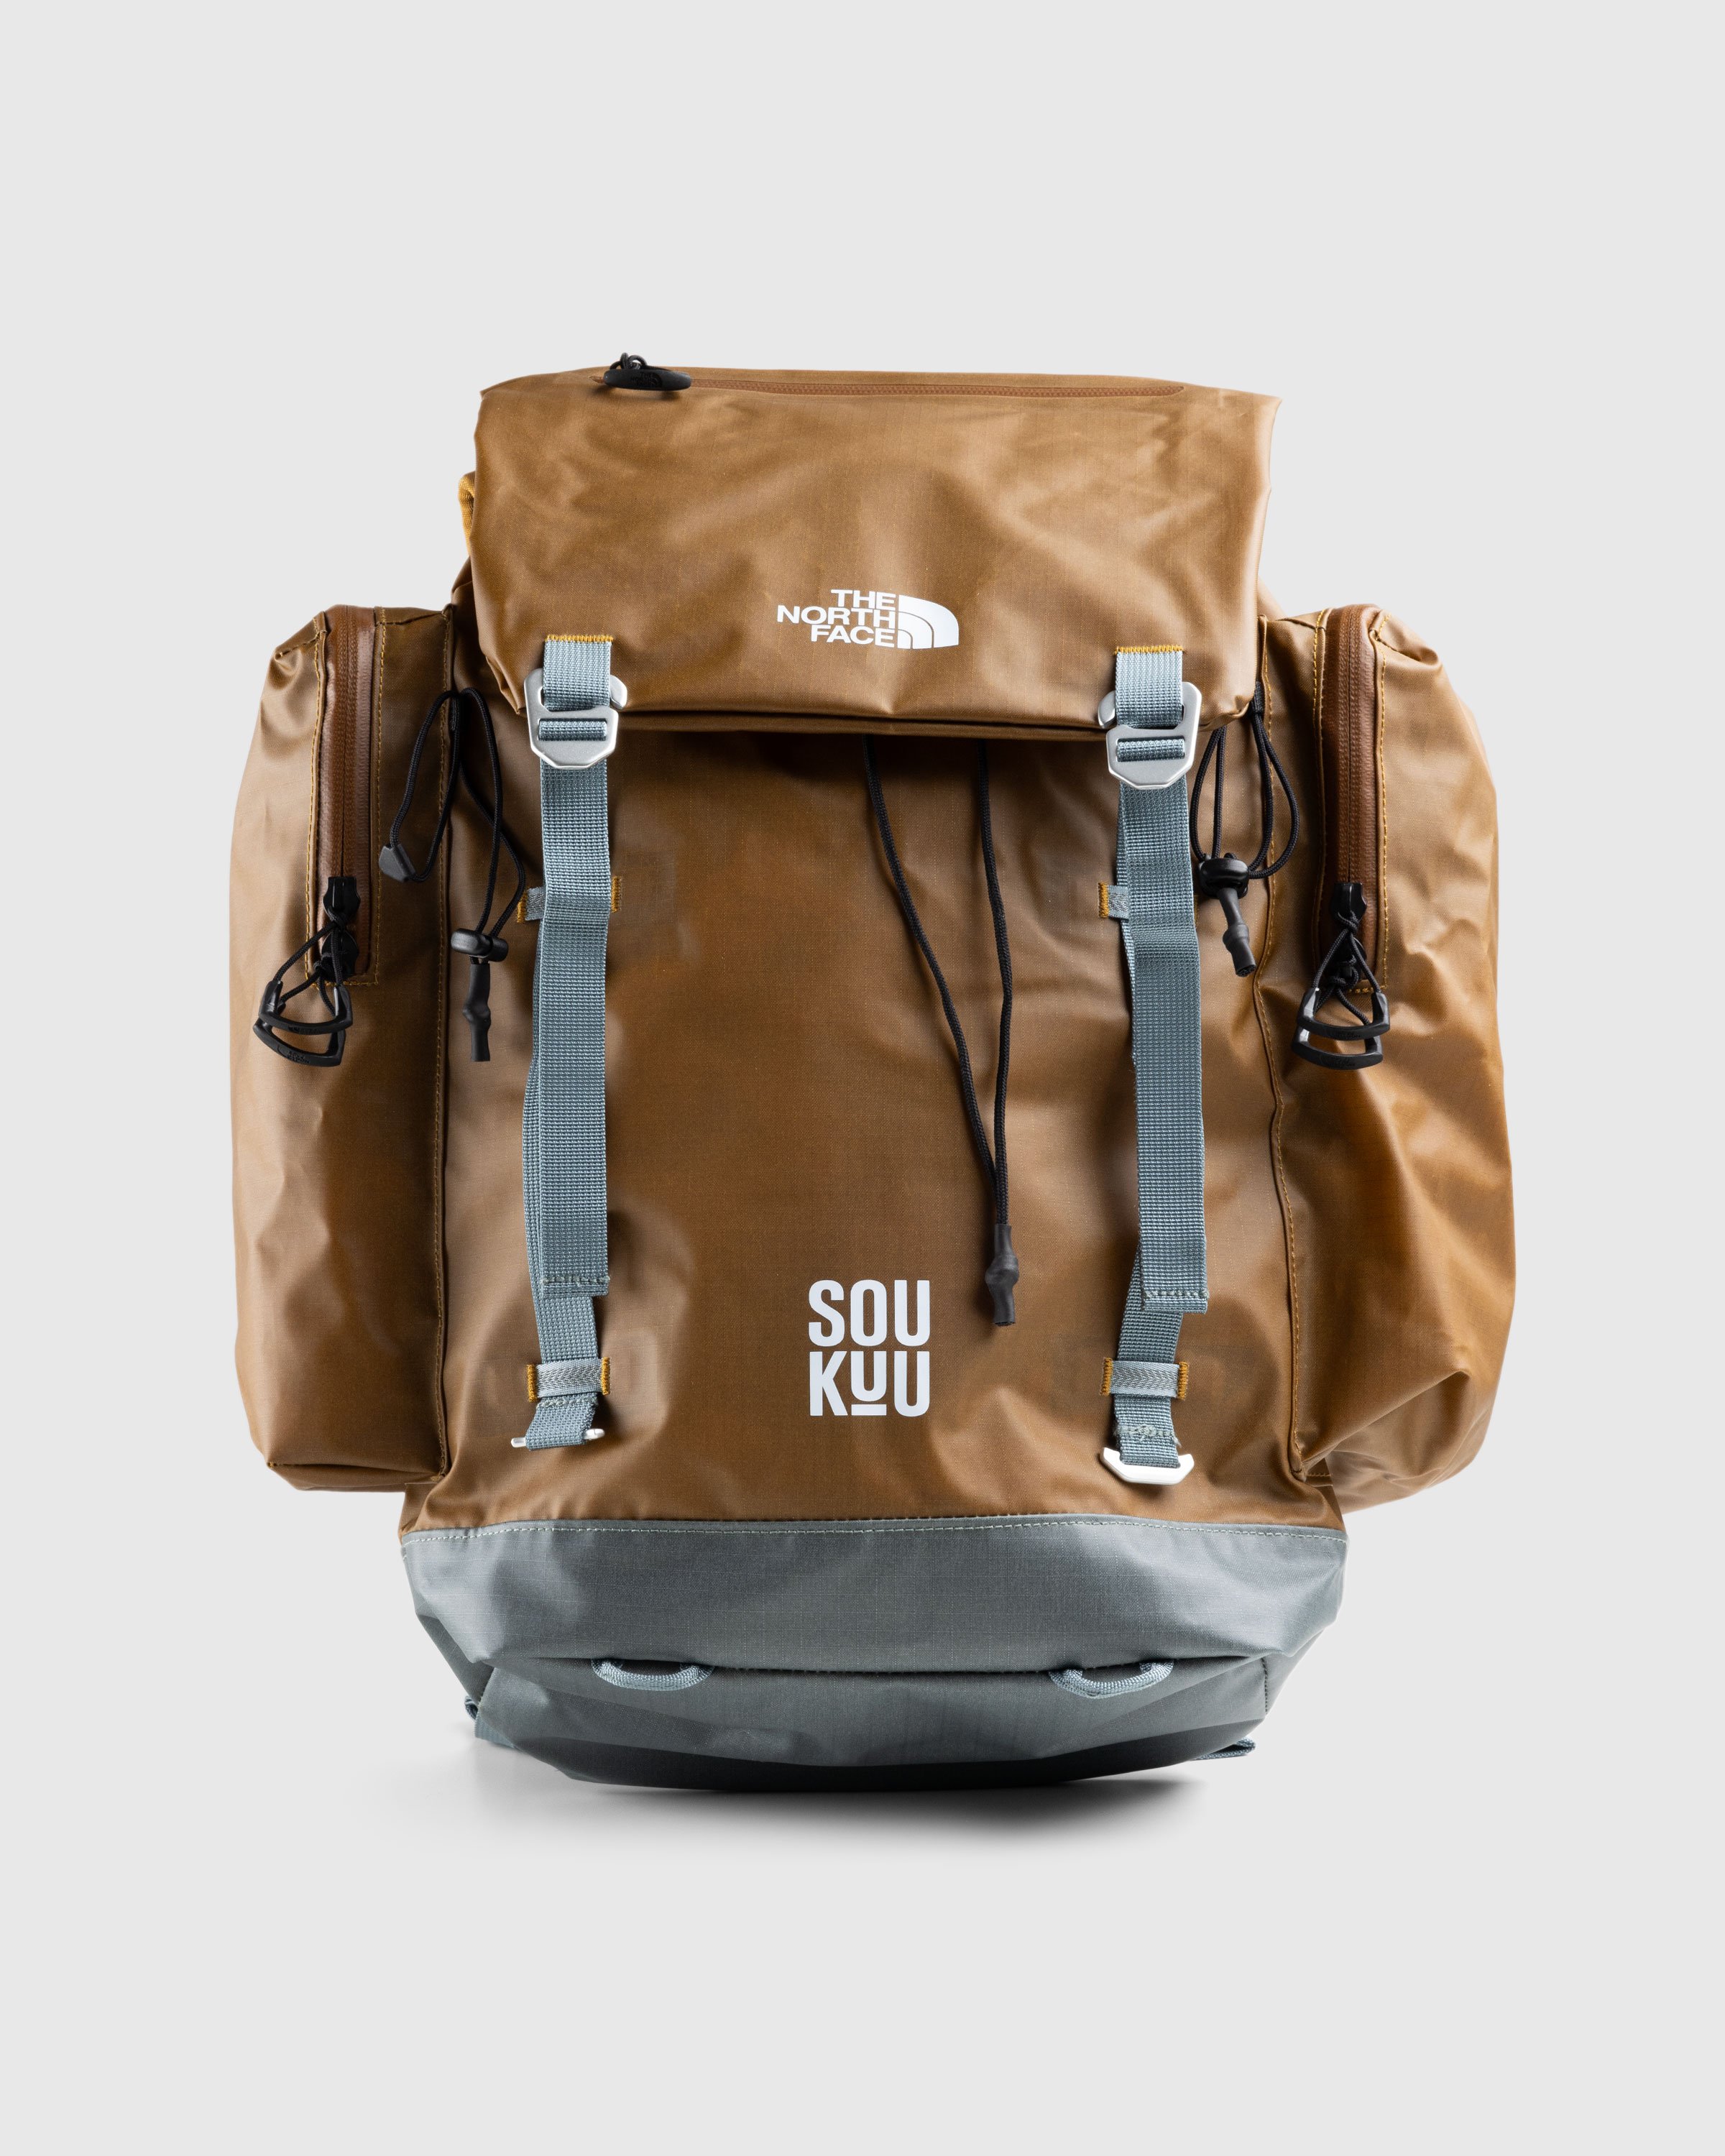 The North Face x UNDERCOVER - Soukuu Backpack Bronze Brown/Concrete Gray - Accessories - Multi - Image 1